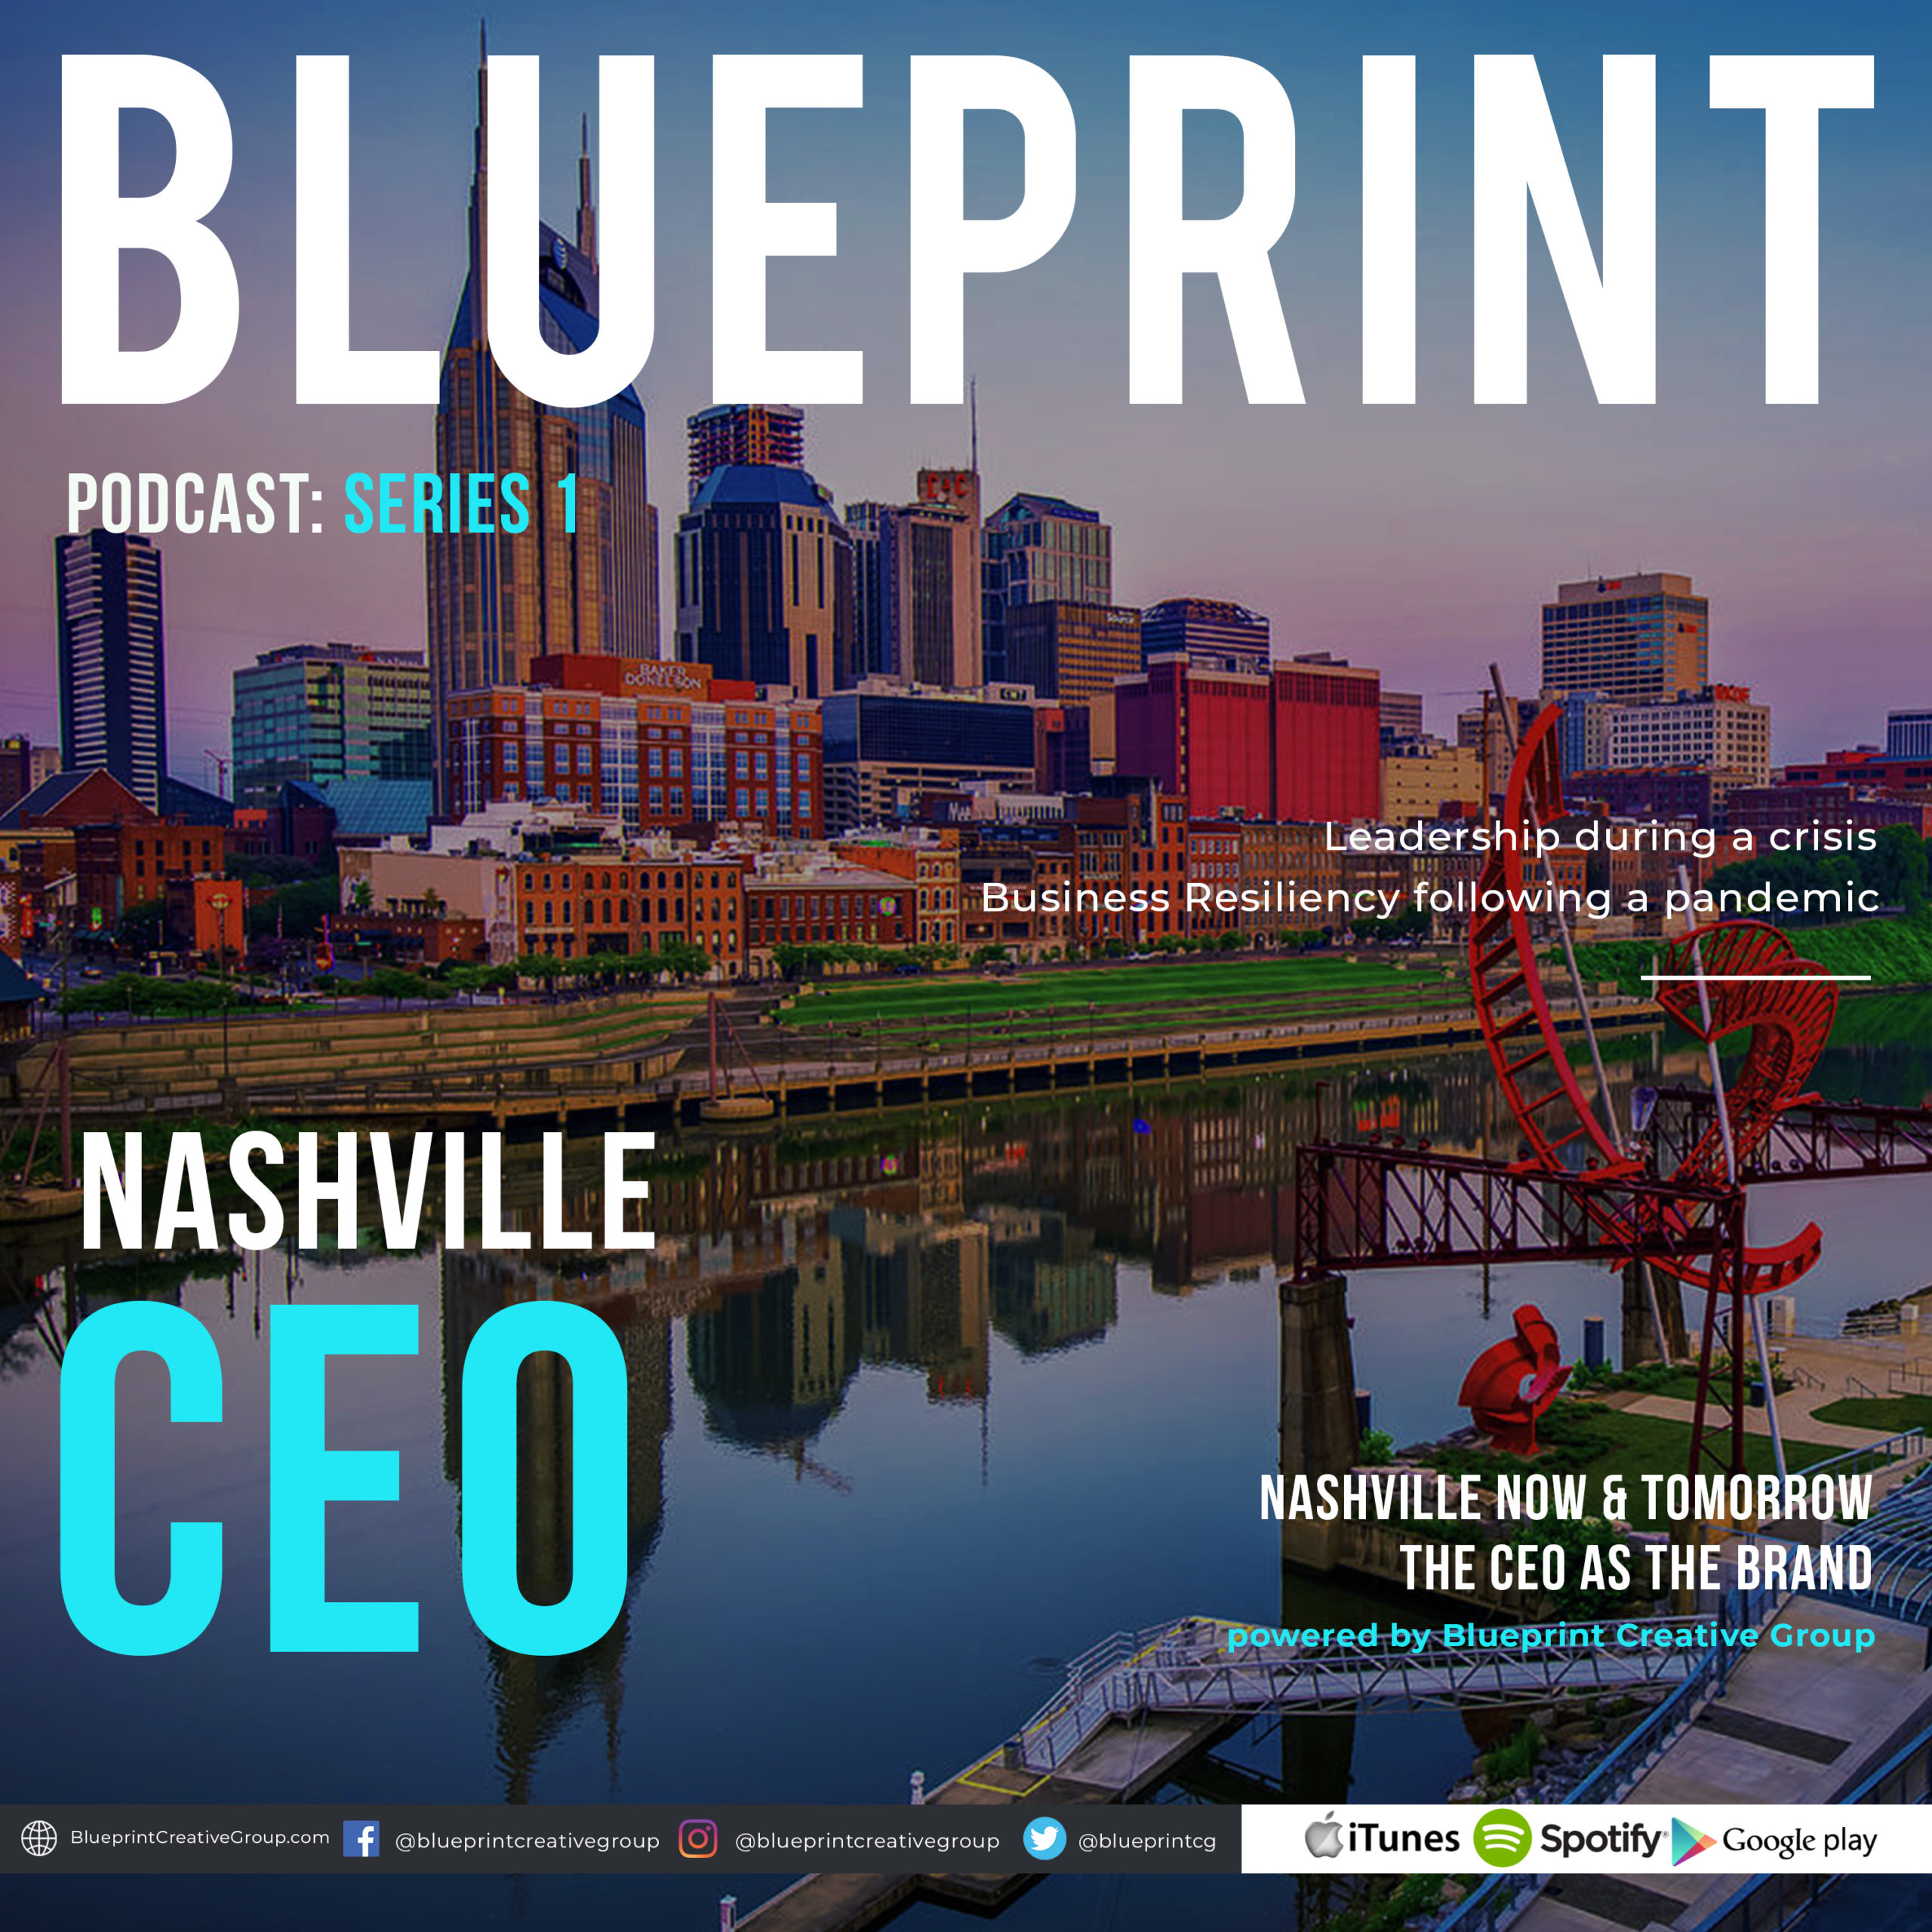 Nashville CEOs share how their organizations have pivoted since the pandemic